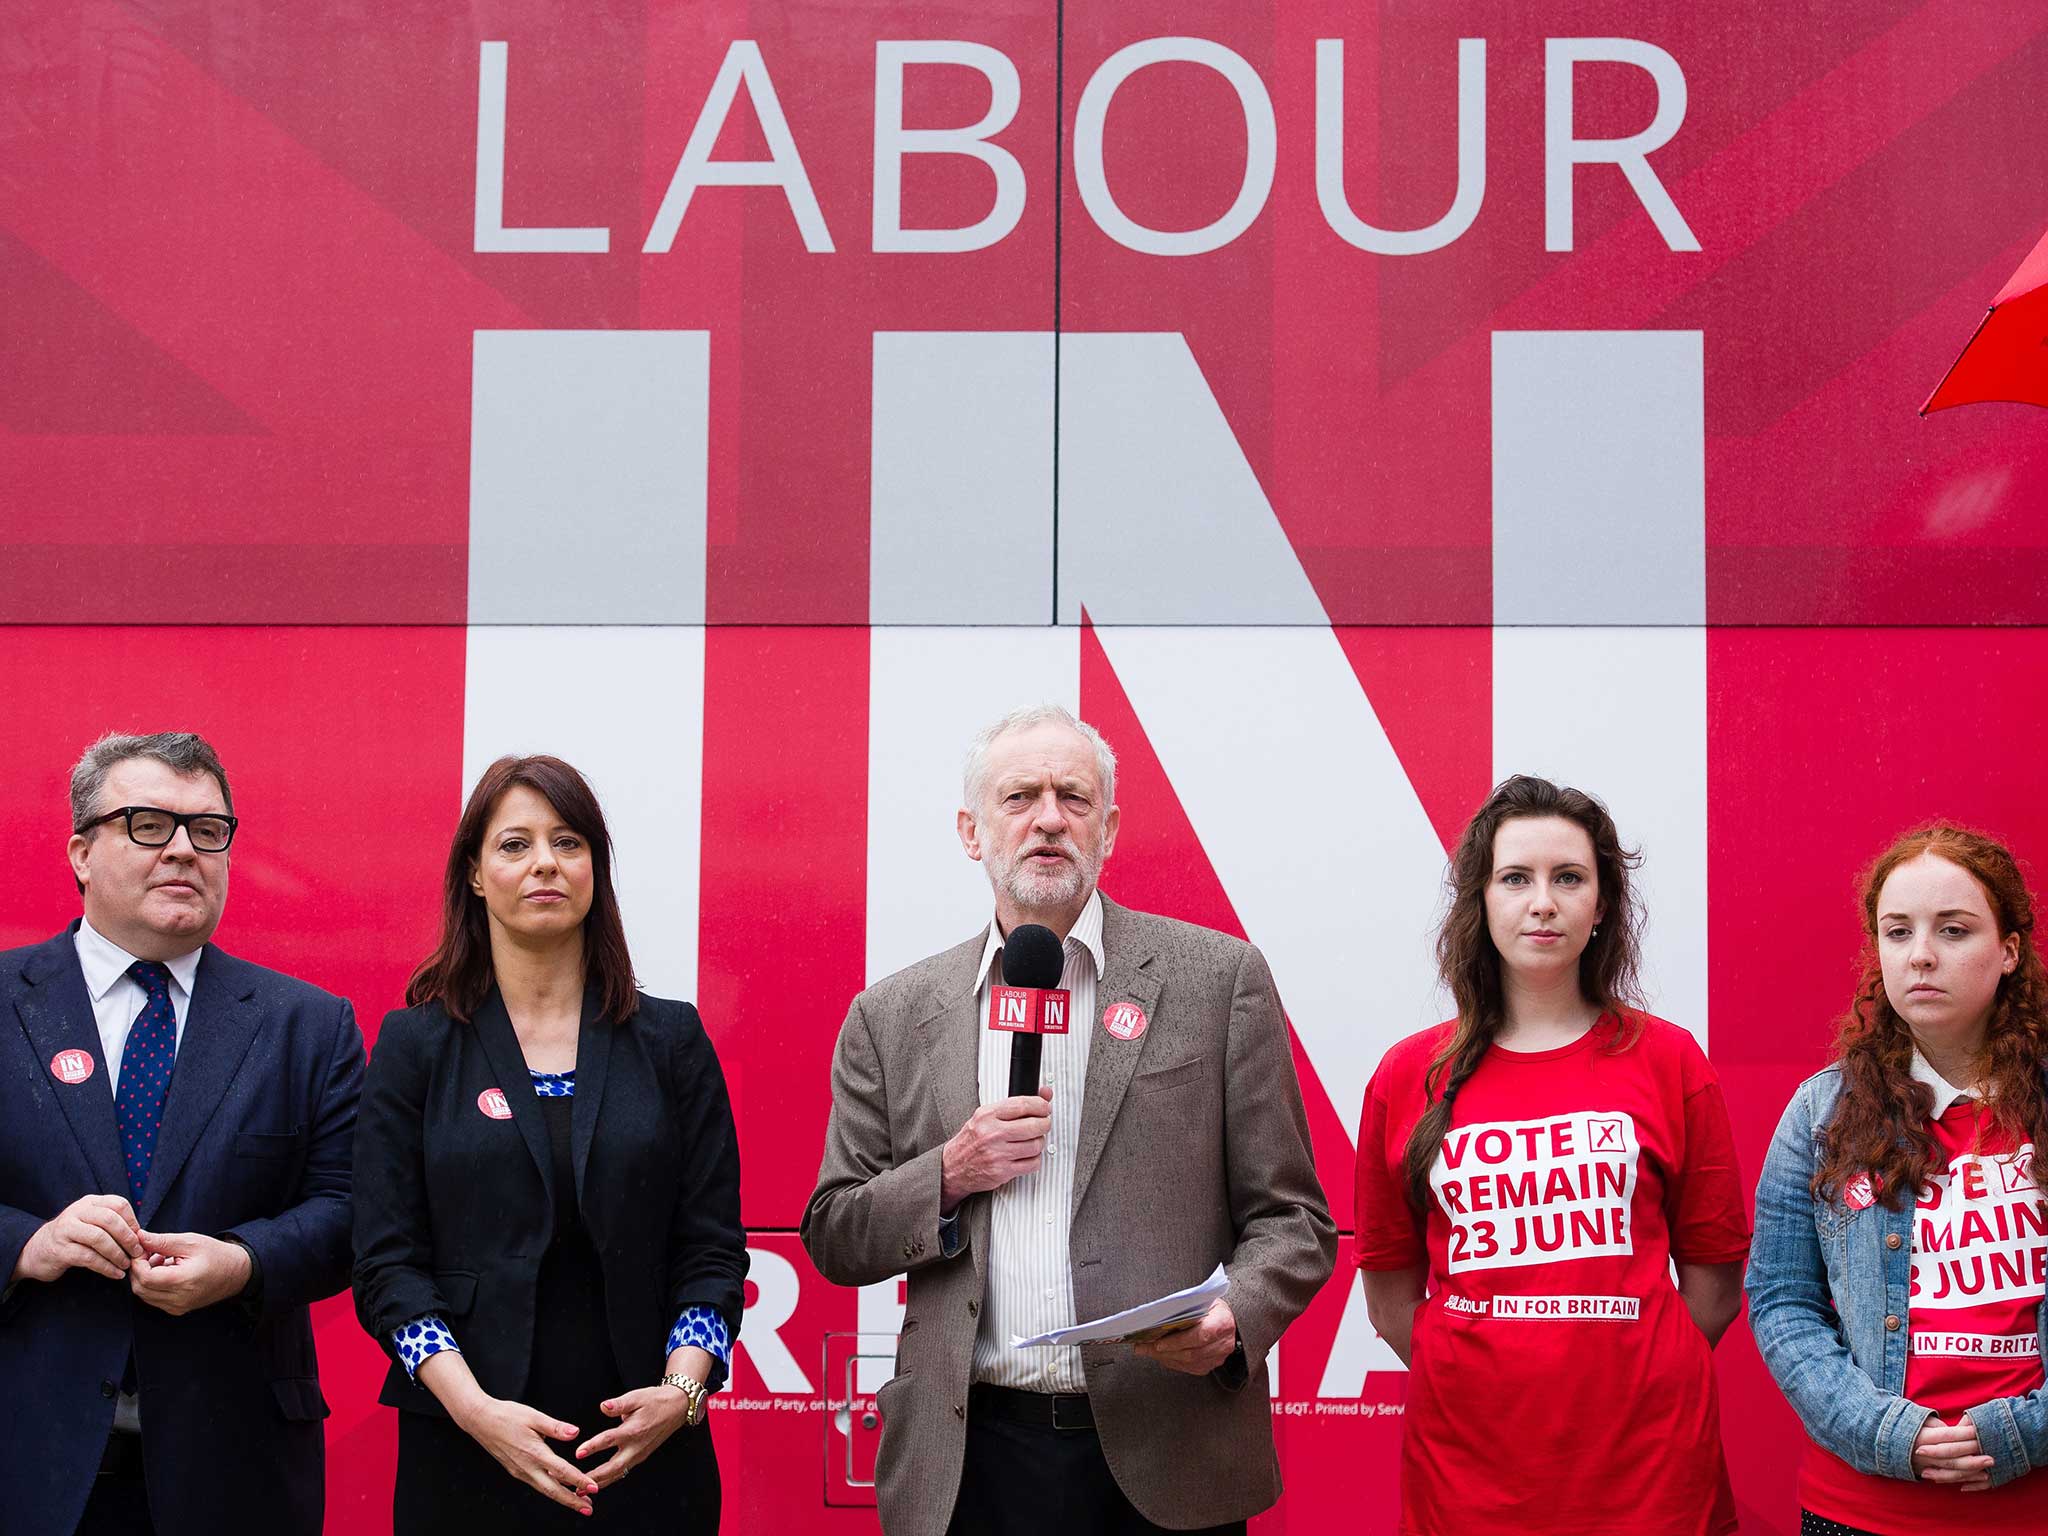 How to start a new Labour party in 10 simple steps | The ...